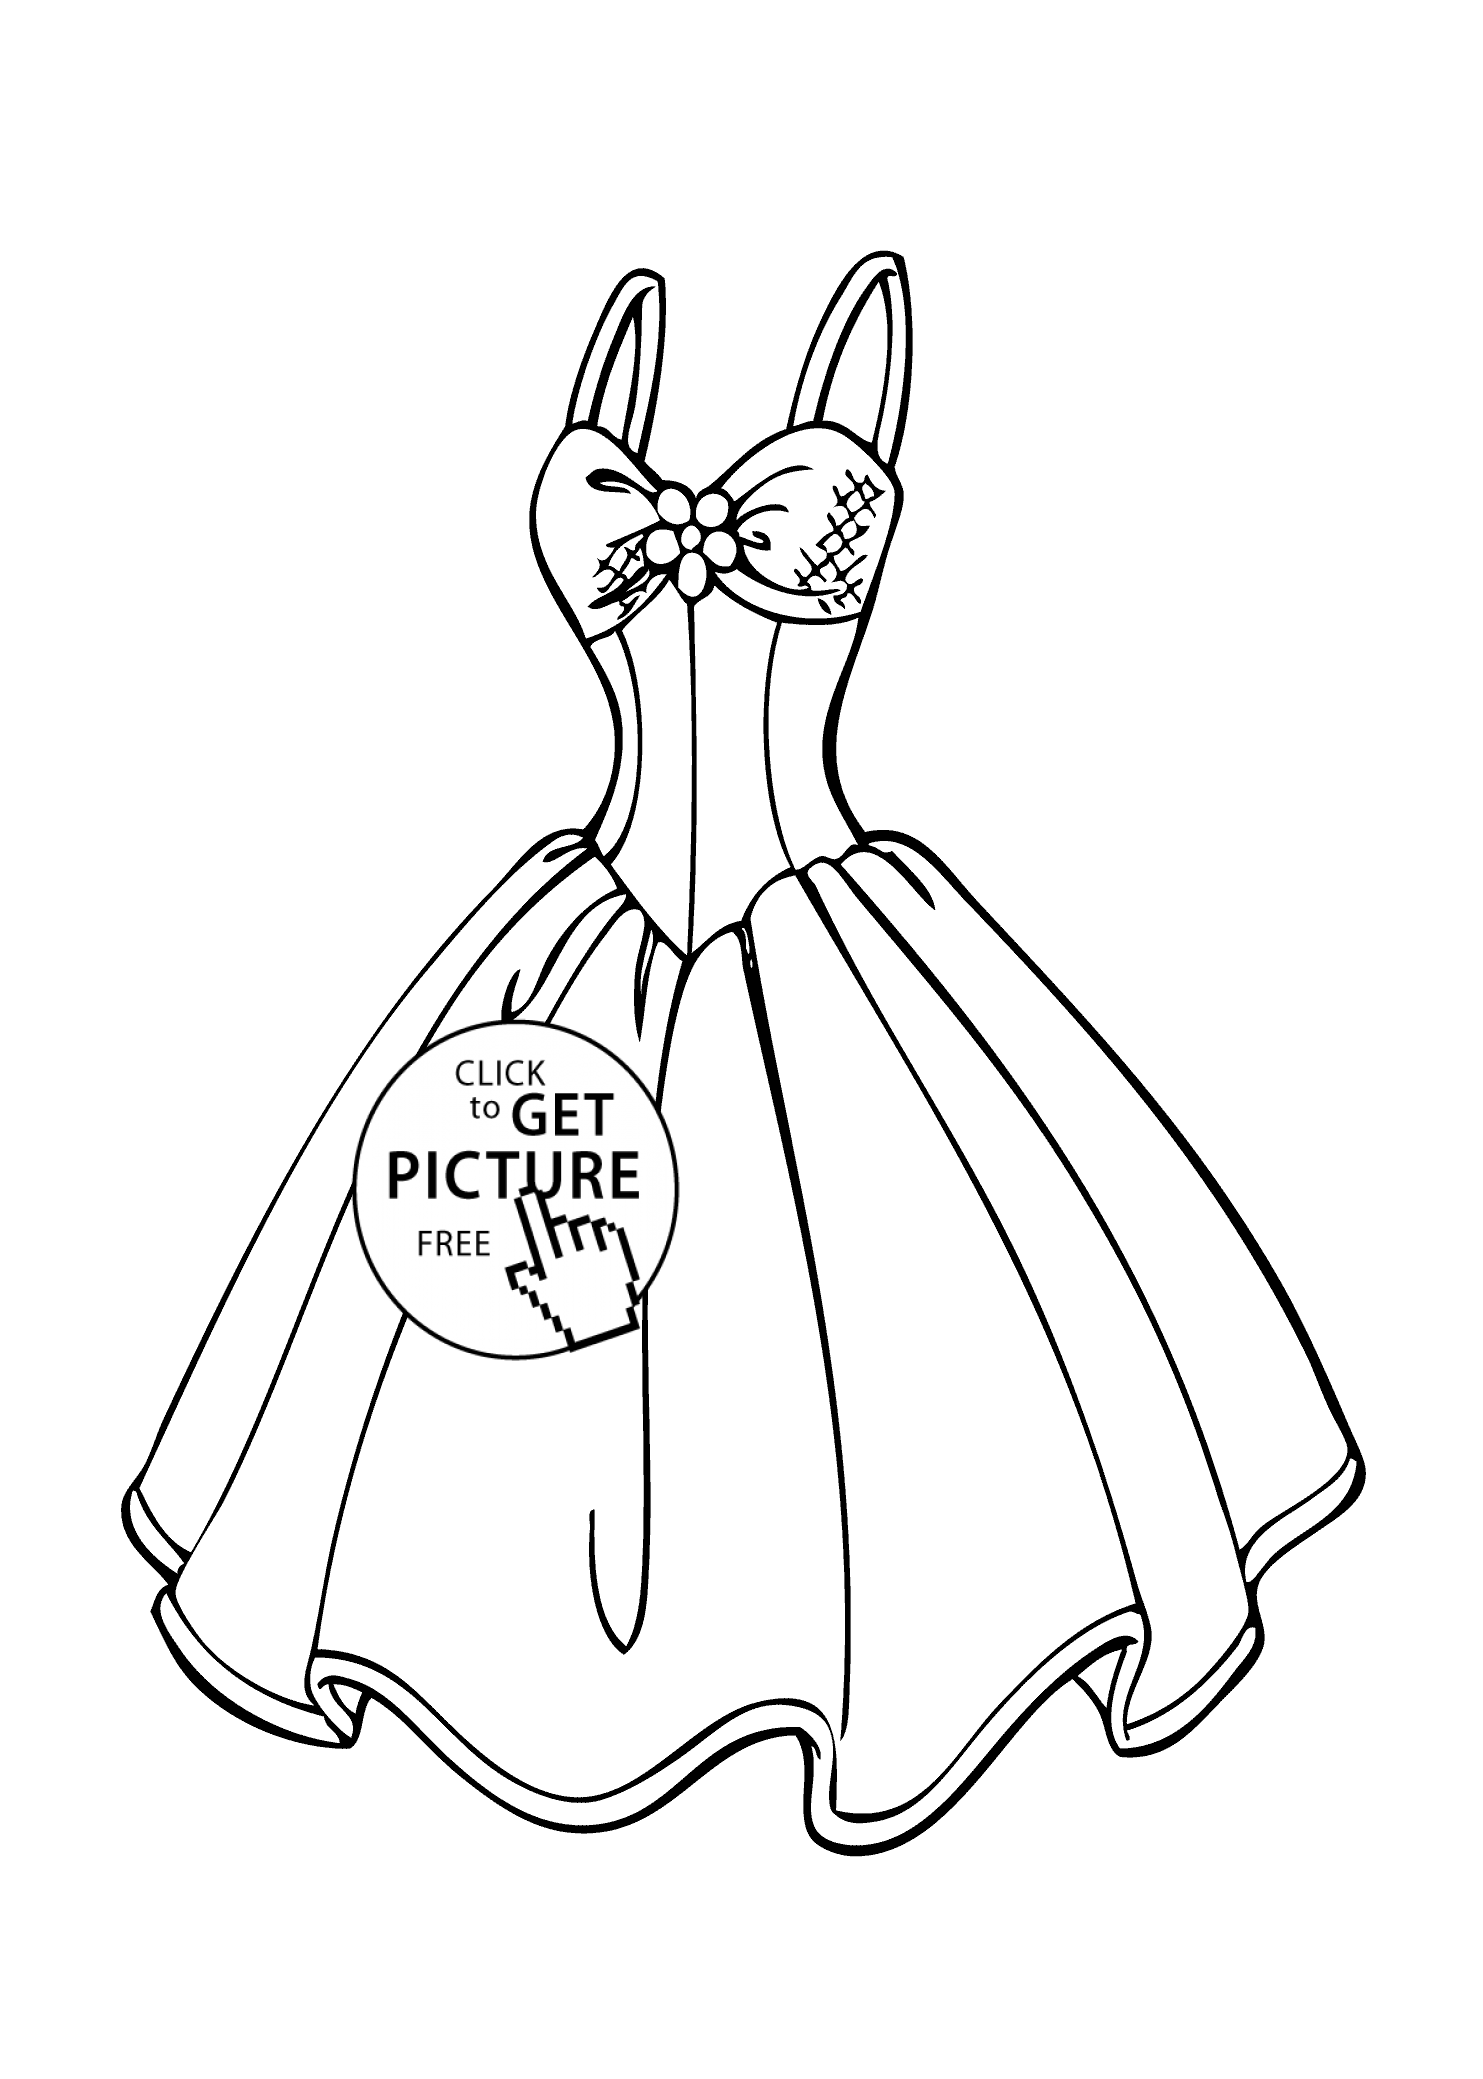 Wedding dress coloring page for girls, printable free